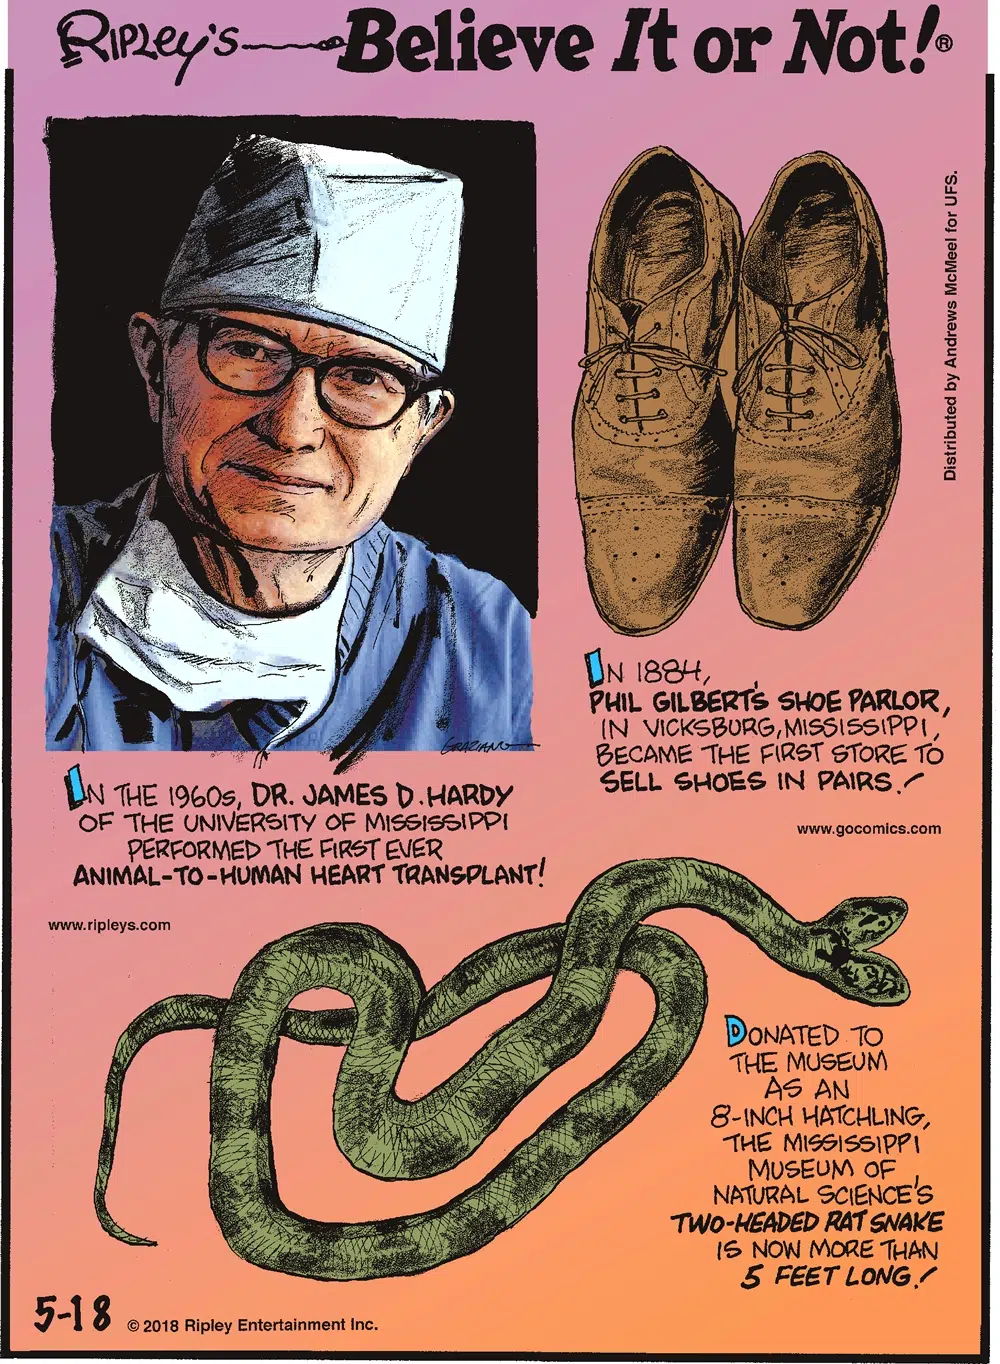 In the 1960s, Dr. James D. Hardy of the University of Mississippi performed the first ever animal-to-human heart transplant!-------------------- In 1884, Phil Gilbert's Shoe Parlor, in Vicksburg, Mississippi became the first store to sell shoes in pairs!-------------------- Donated to the museum as an 8-inch hatchling, the Mississippi Museum of Natural Science's two-headed rat snake is now more than 5 feet long!